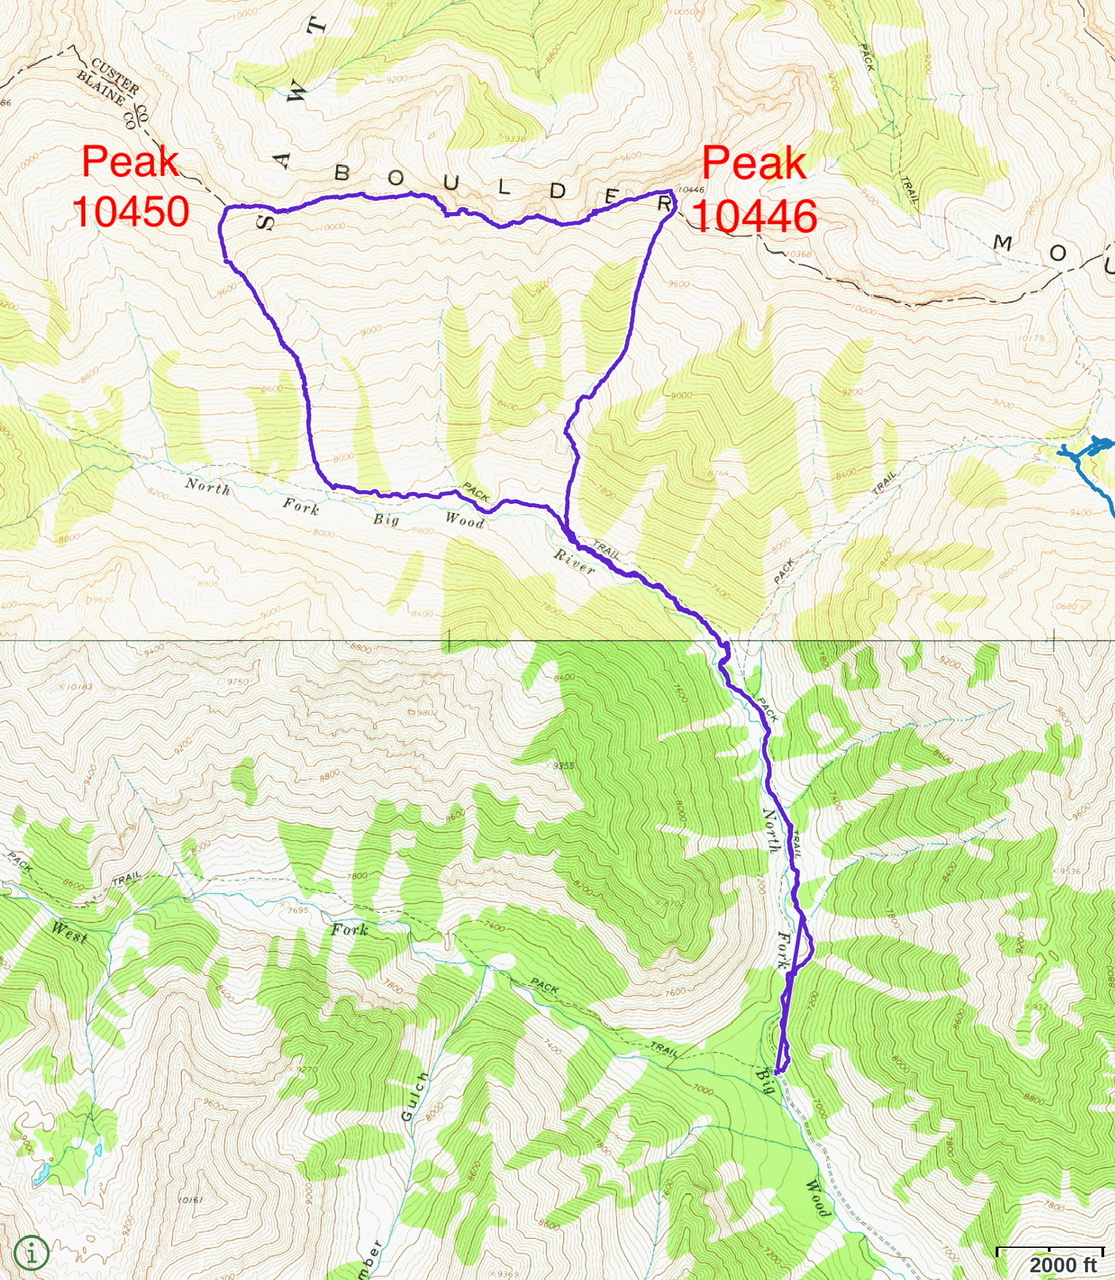 Brett’s GPS track for the Peak 10450 and Peak 10446 traverse. Round trip measures 9.89 miles with 4,100 feet of gain.